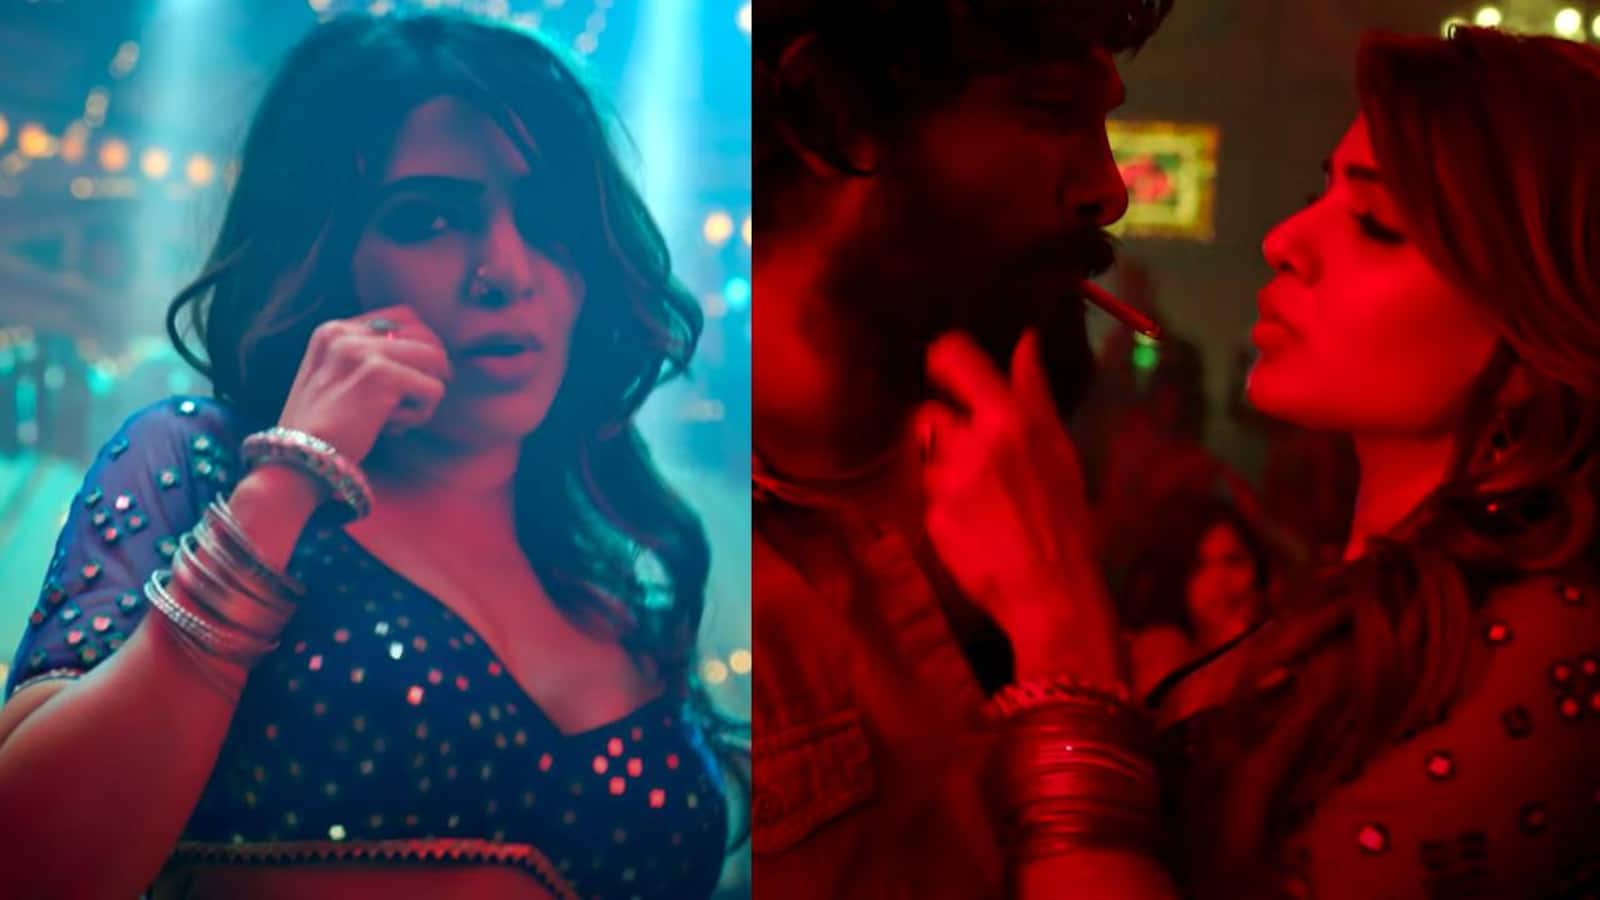 Pushpa song Oo Antava starring Samantha Ruth Prabhu in a never seen before avatar was an EXPERIMENT says Devi Sri Prasad